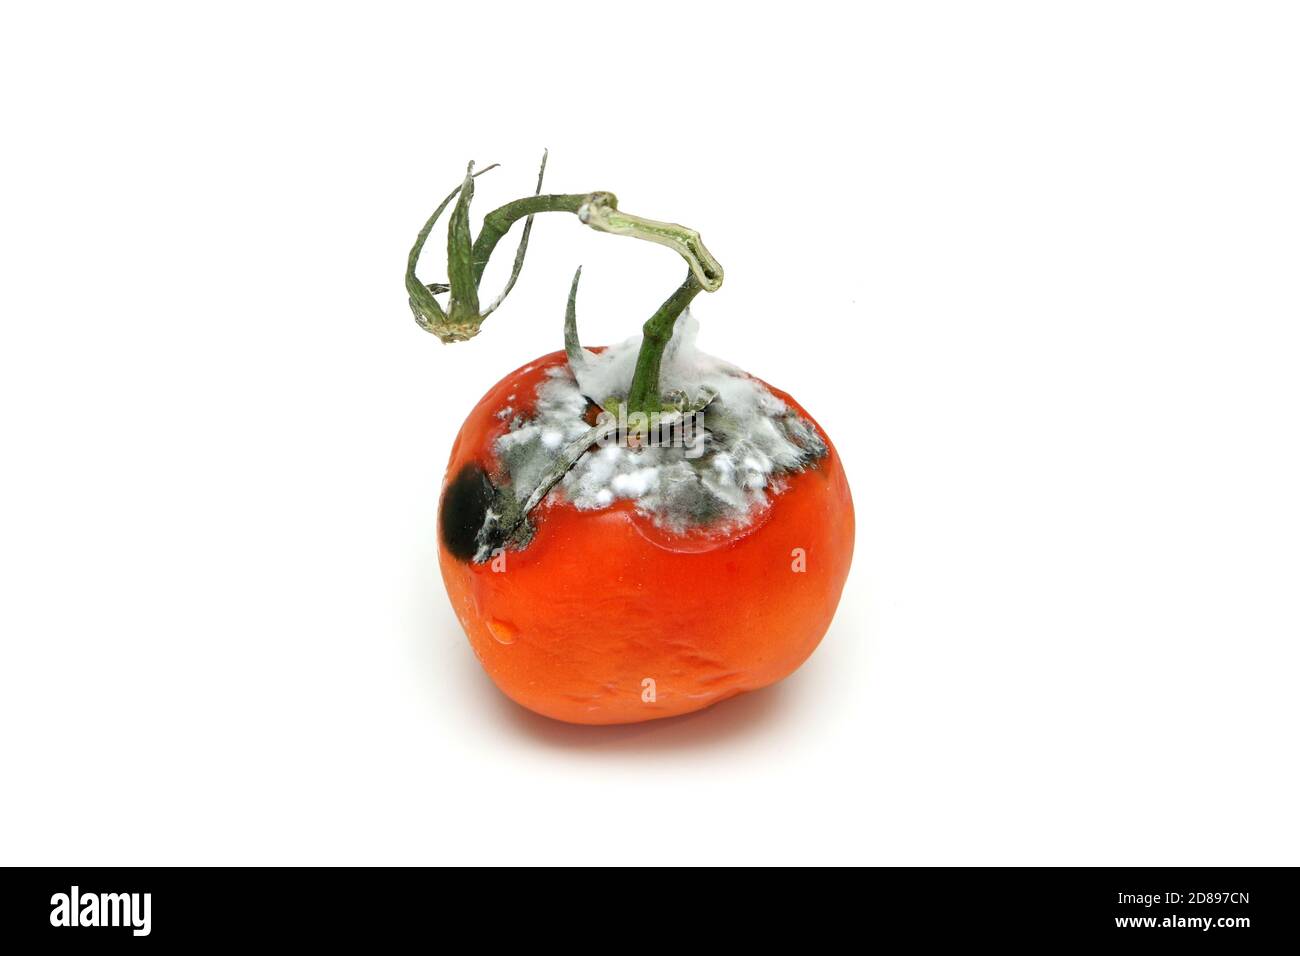 A picture of a rotten tomato isolated on a white background. Stock Photo